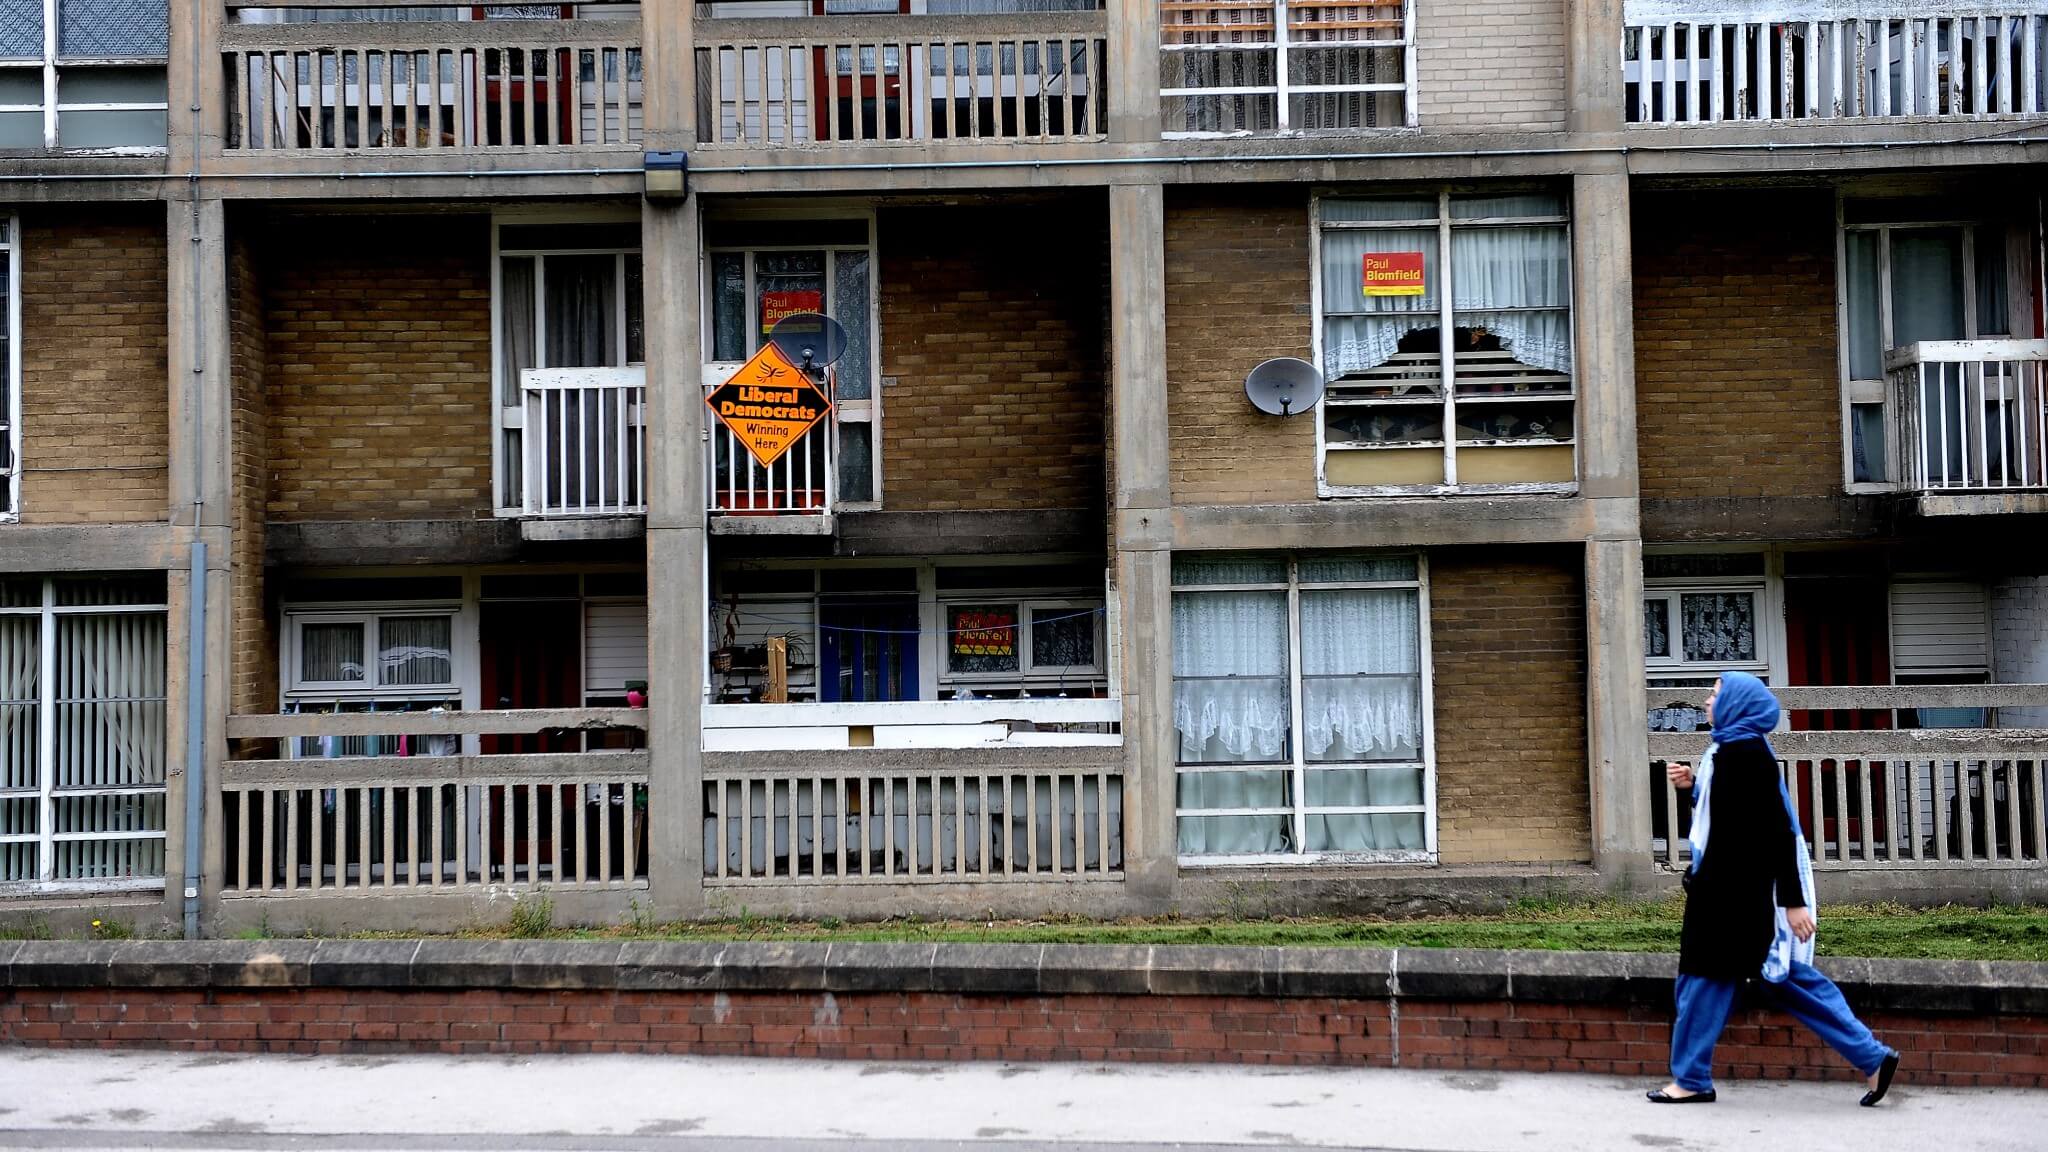 Four Things We Learned About Data From The UK Election Campaign